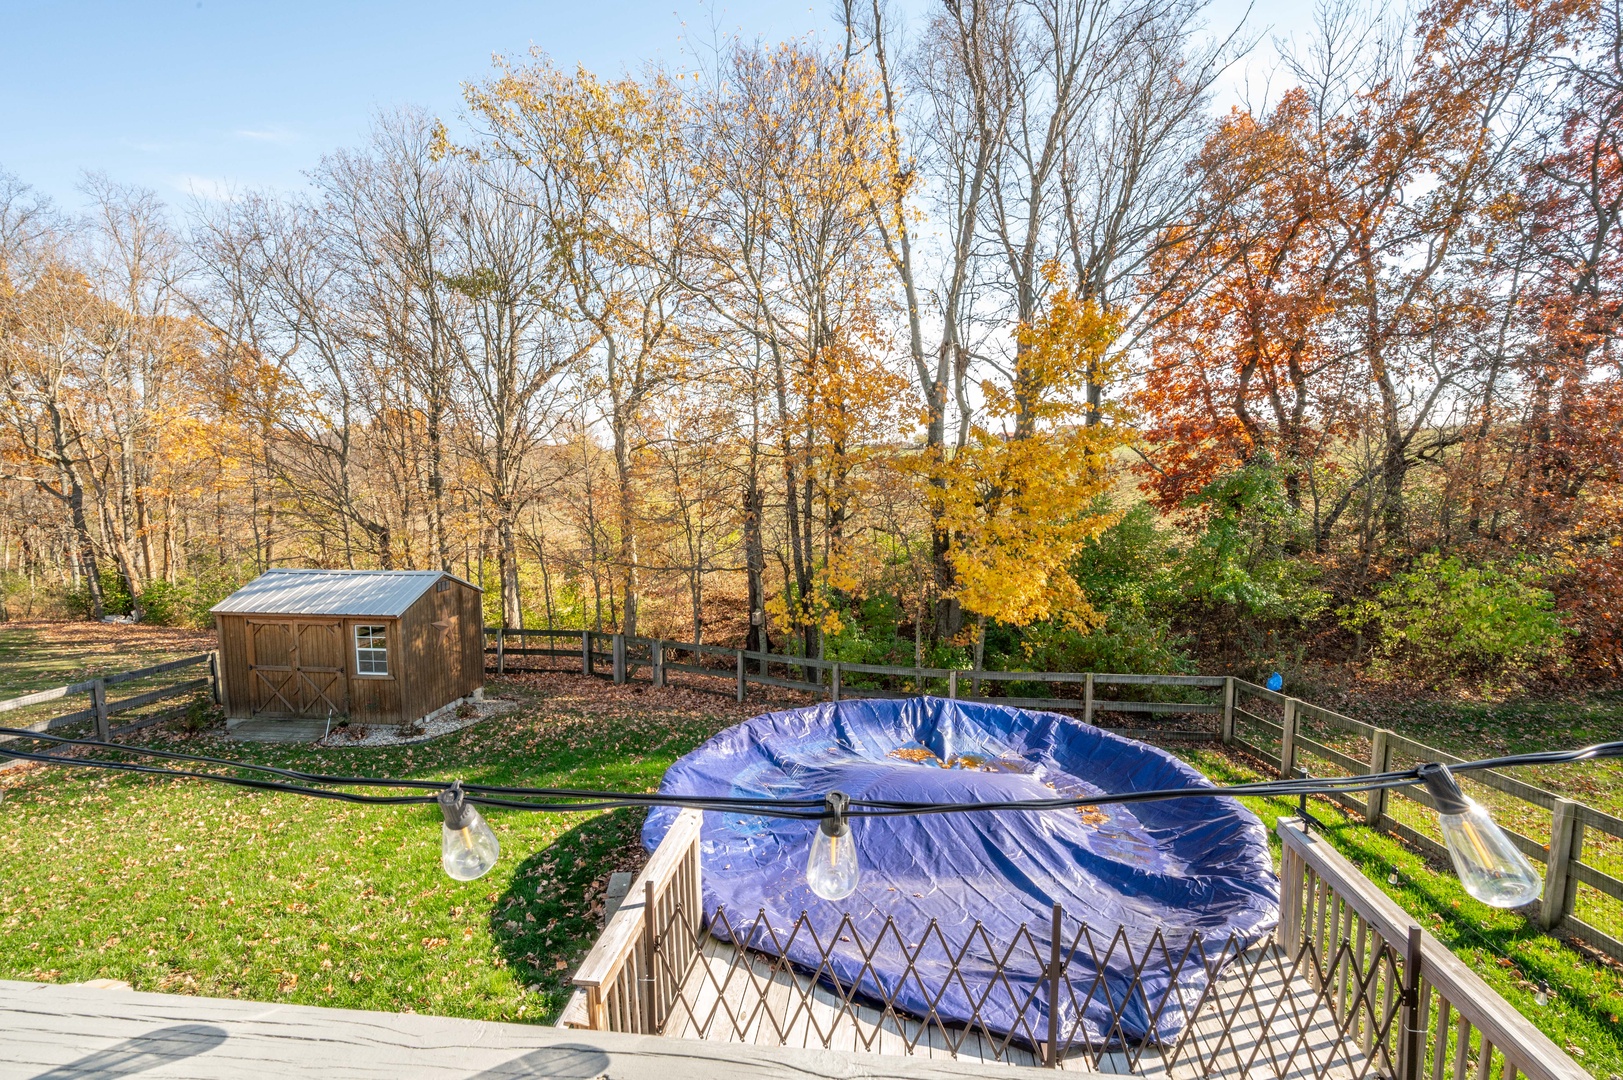 The back yard offers ample space for relaxation and play